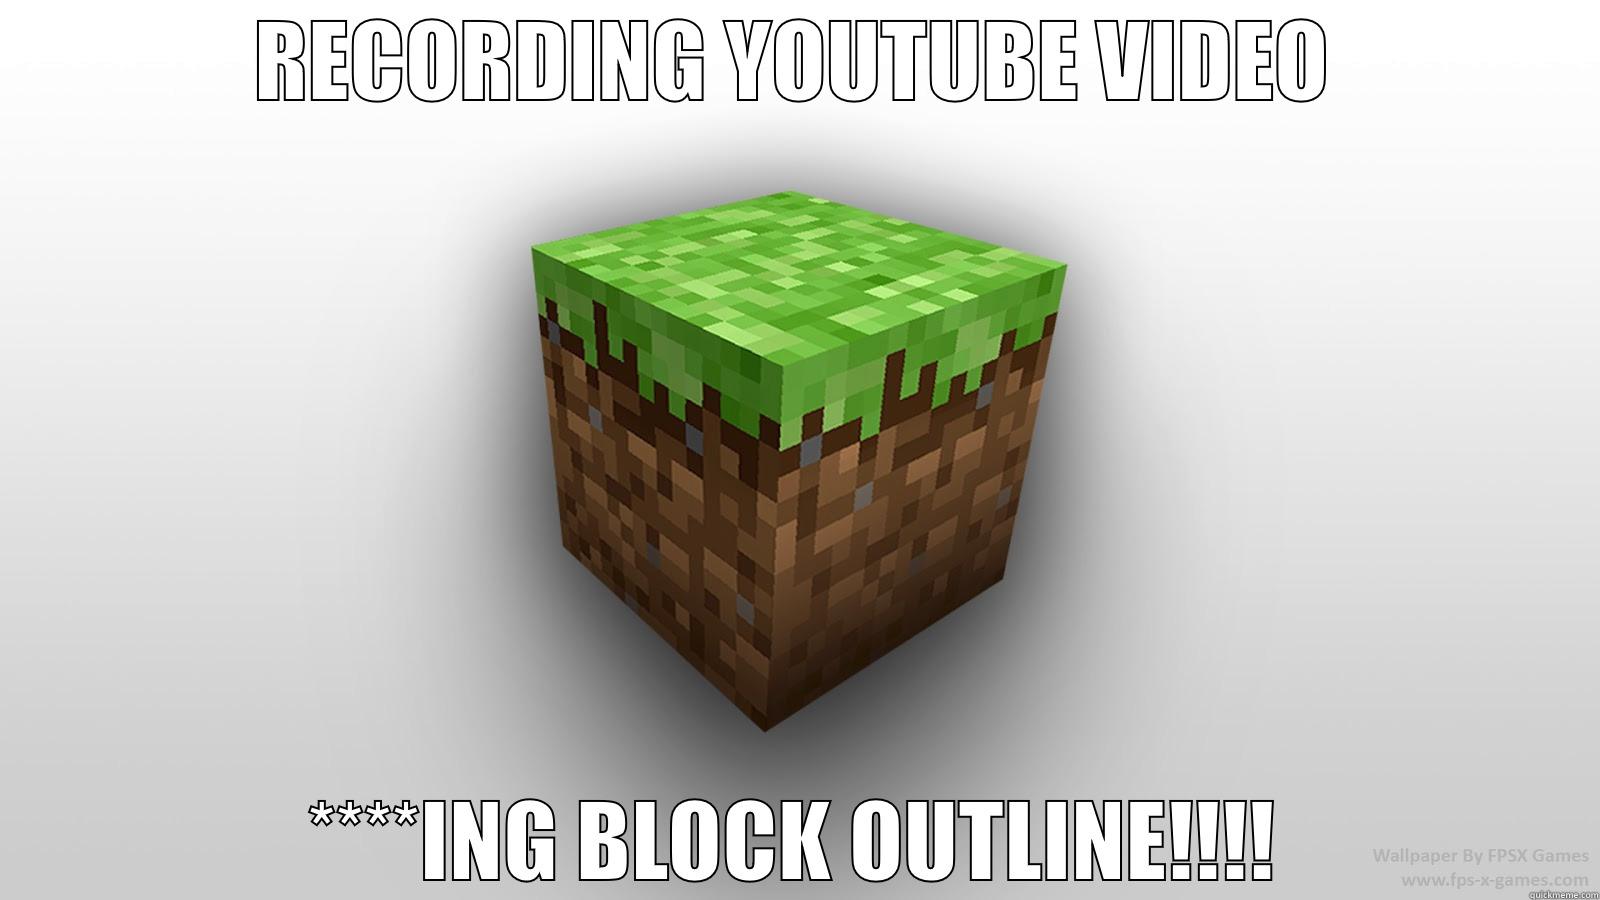 RECORDING YOUTUBE VIDEO ****ING BLOCK OUTLINE!!!! Misc